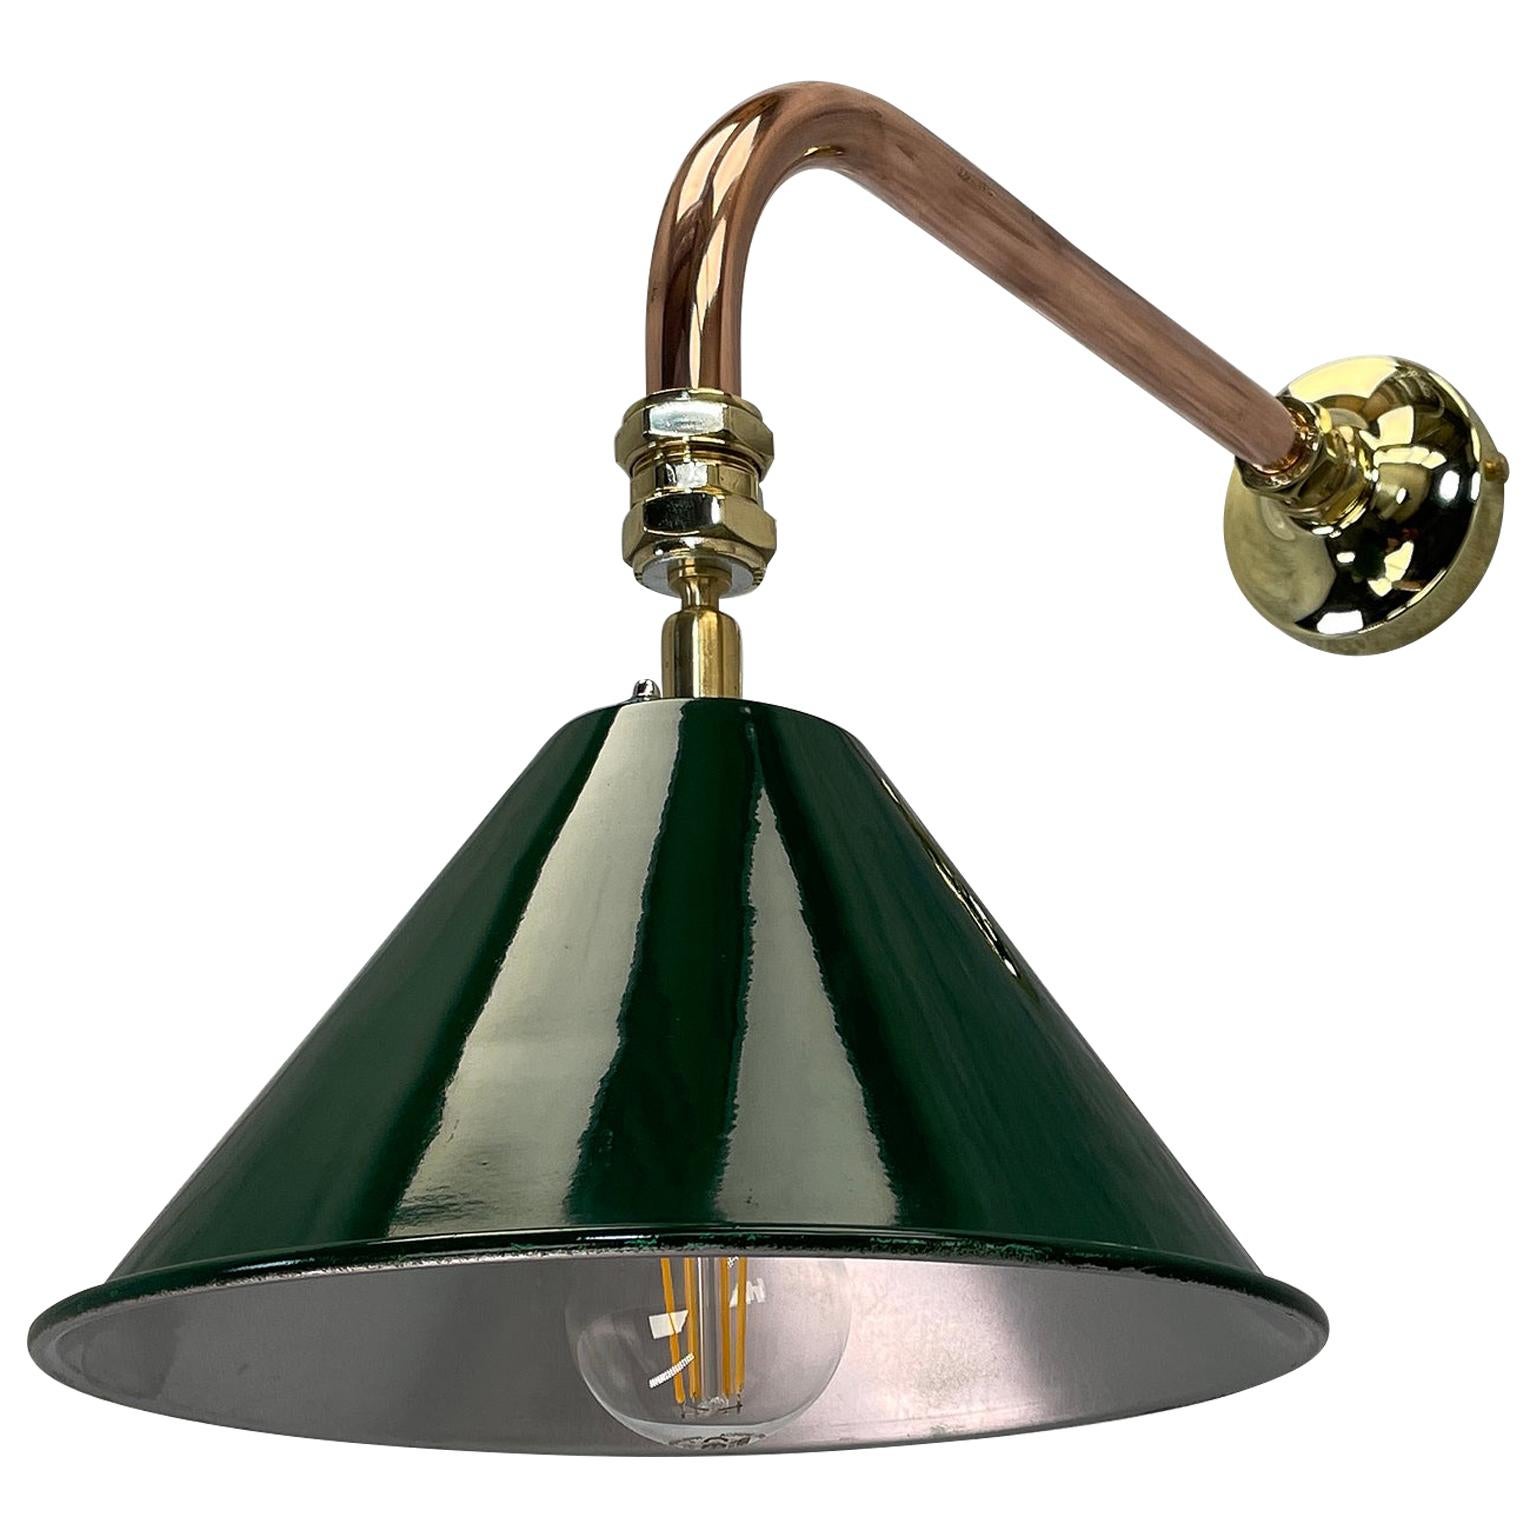 1980's Copper & Brass Cantilever Lamp Green British Army Lamp Shade For Sale